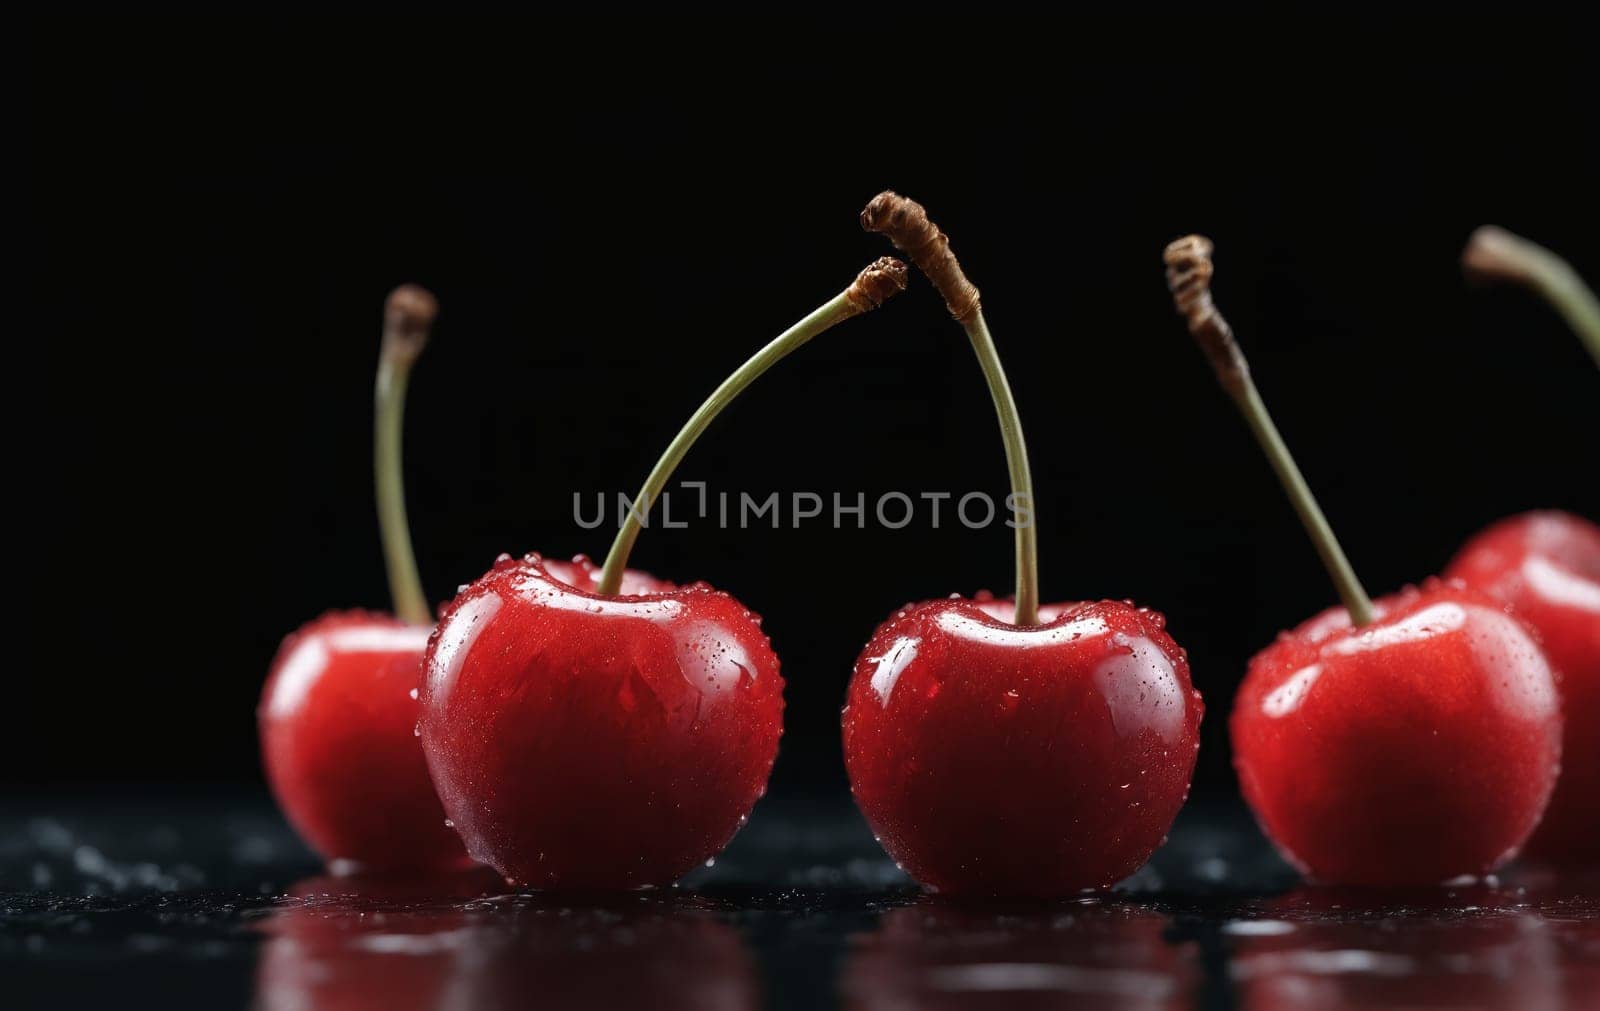 A line of vibrant red cherries resting on a dark countertop, showcasing the beauty of this natural food. Cherries are a superfood and a seedless fruit belonging to the berry family